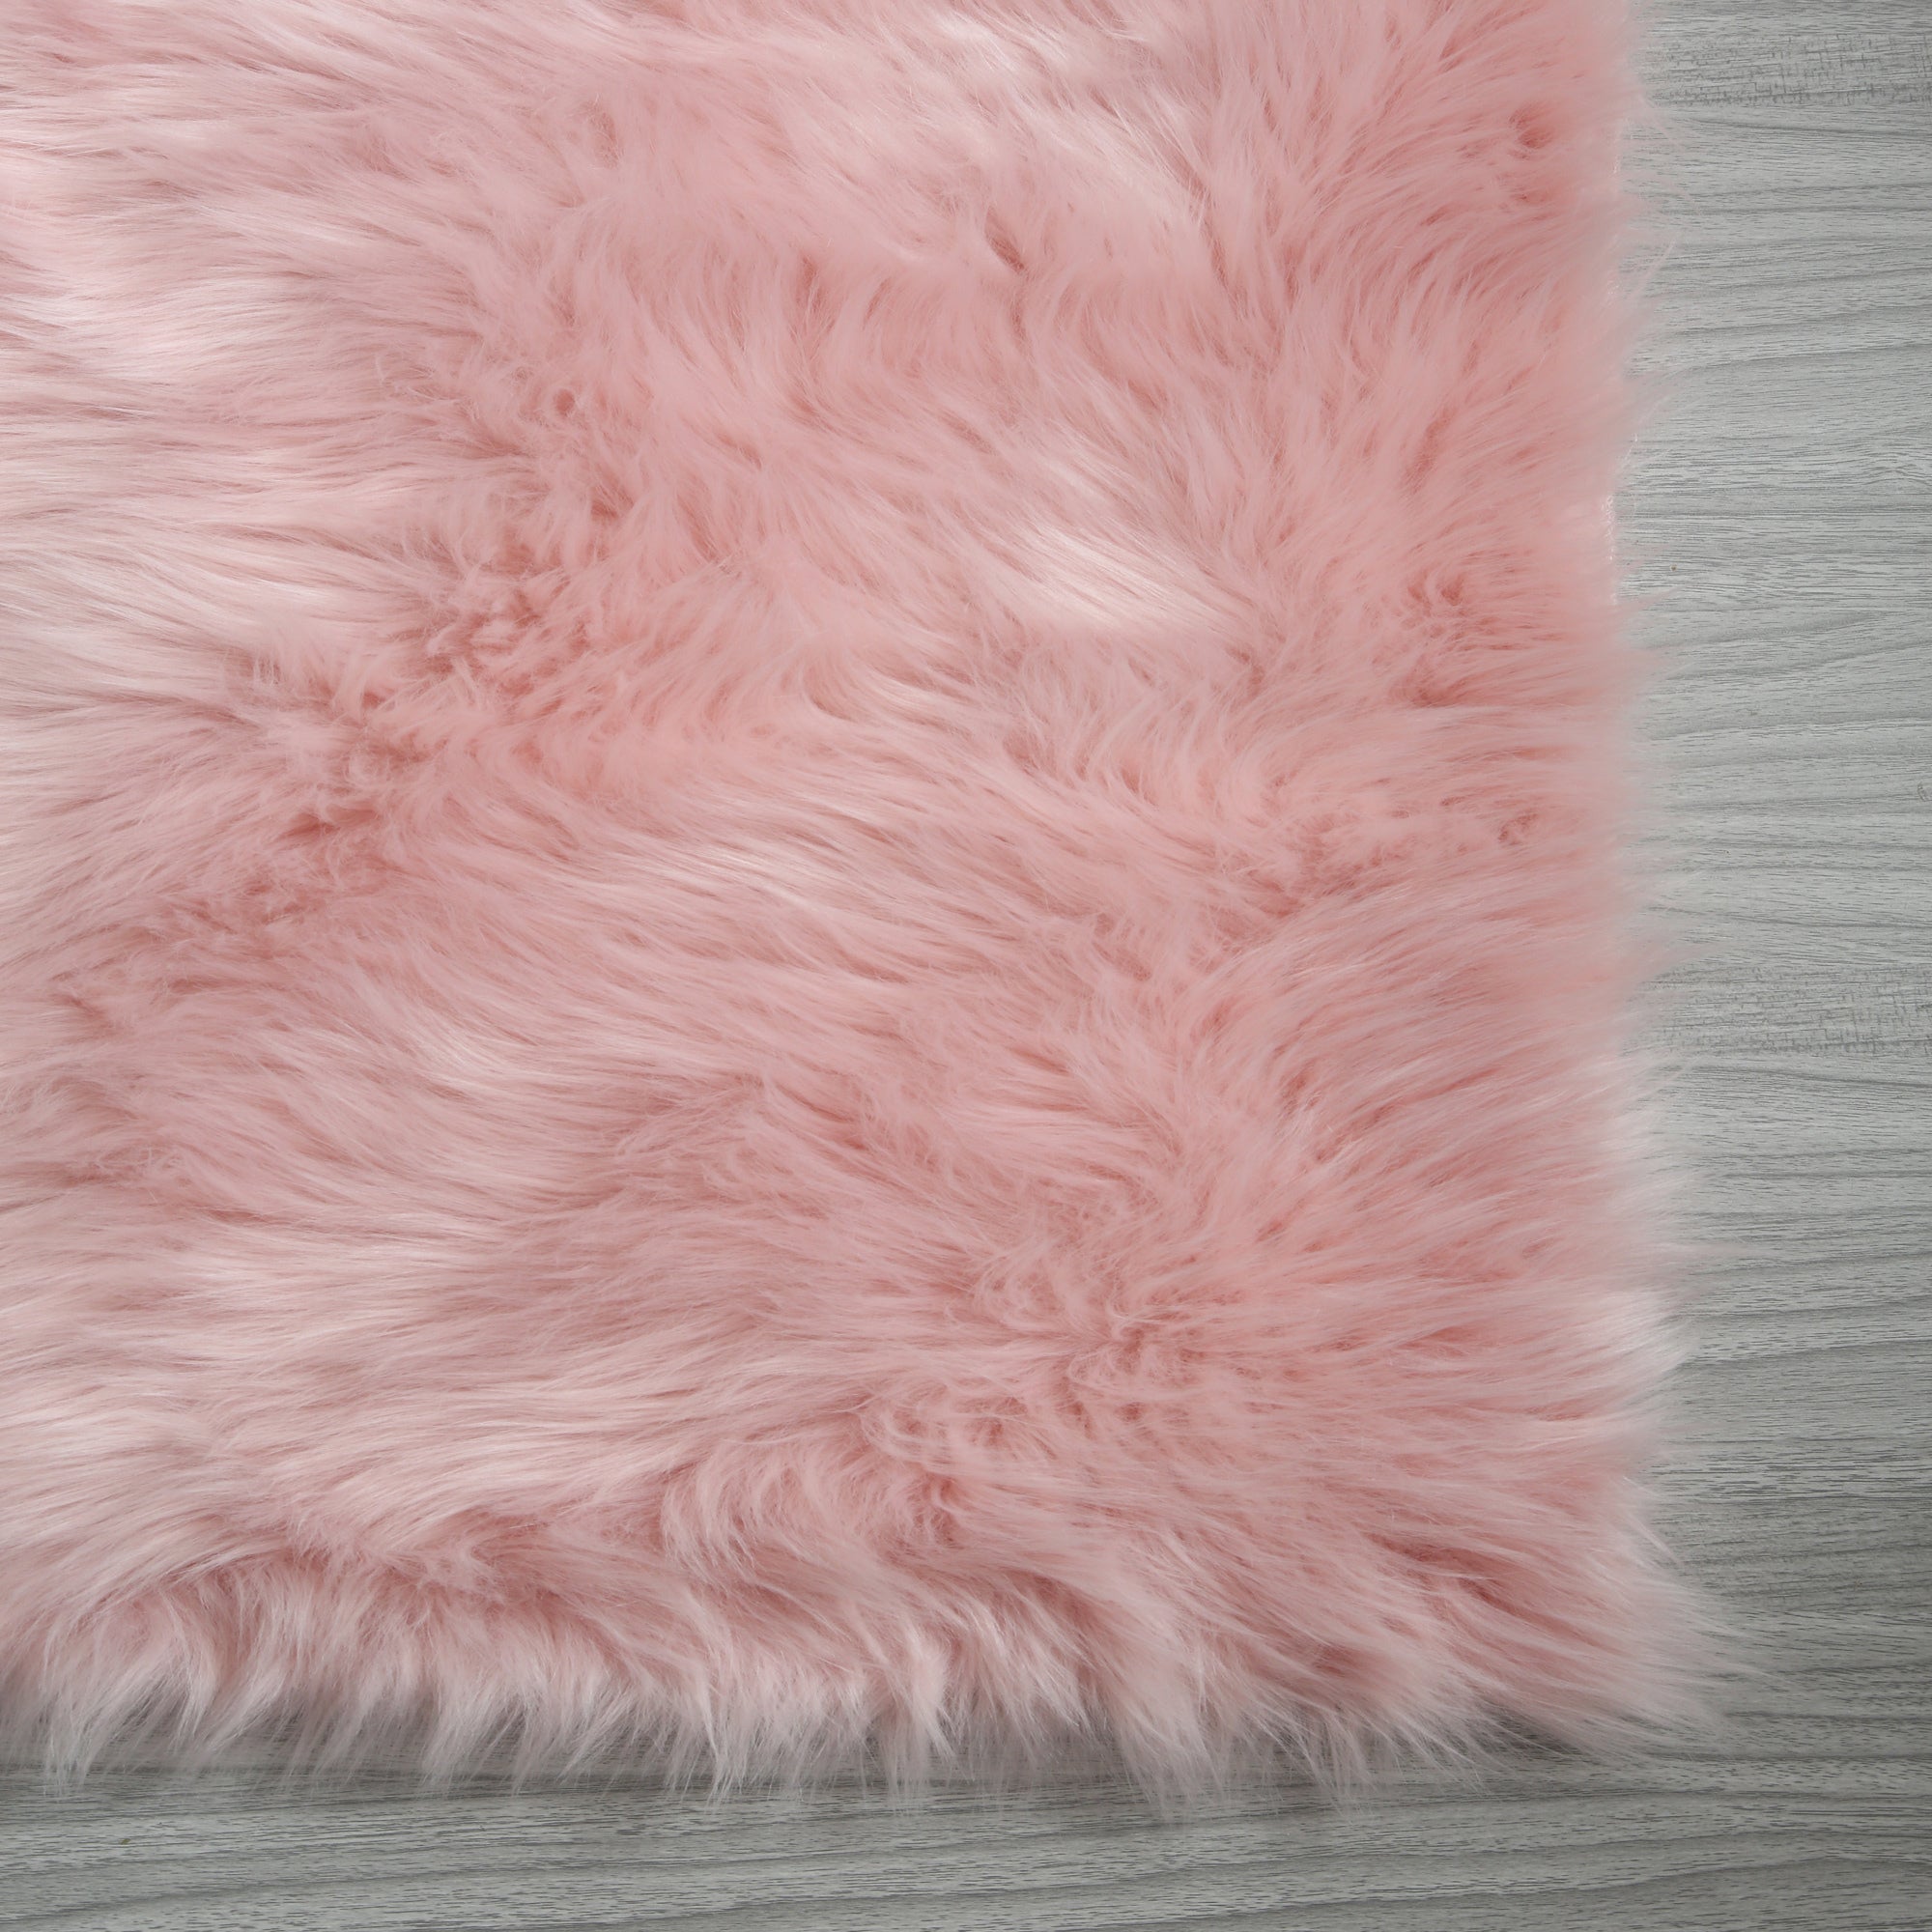 7' x 5' Cozy Collection Ultra Soft Fluffy Faux Fur Sheepskin Area Rug (Pink)